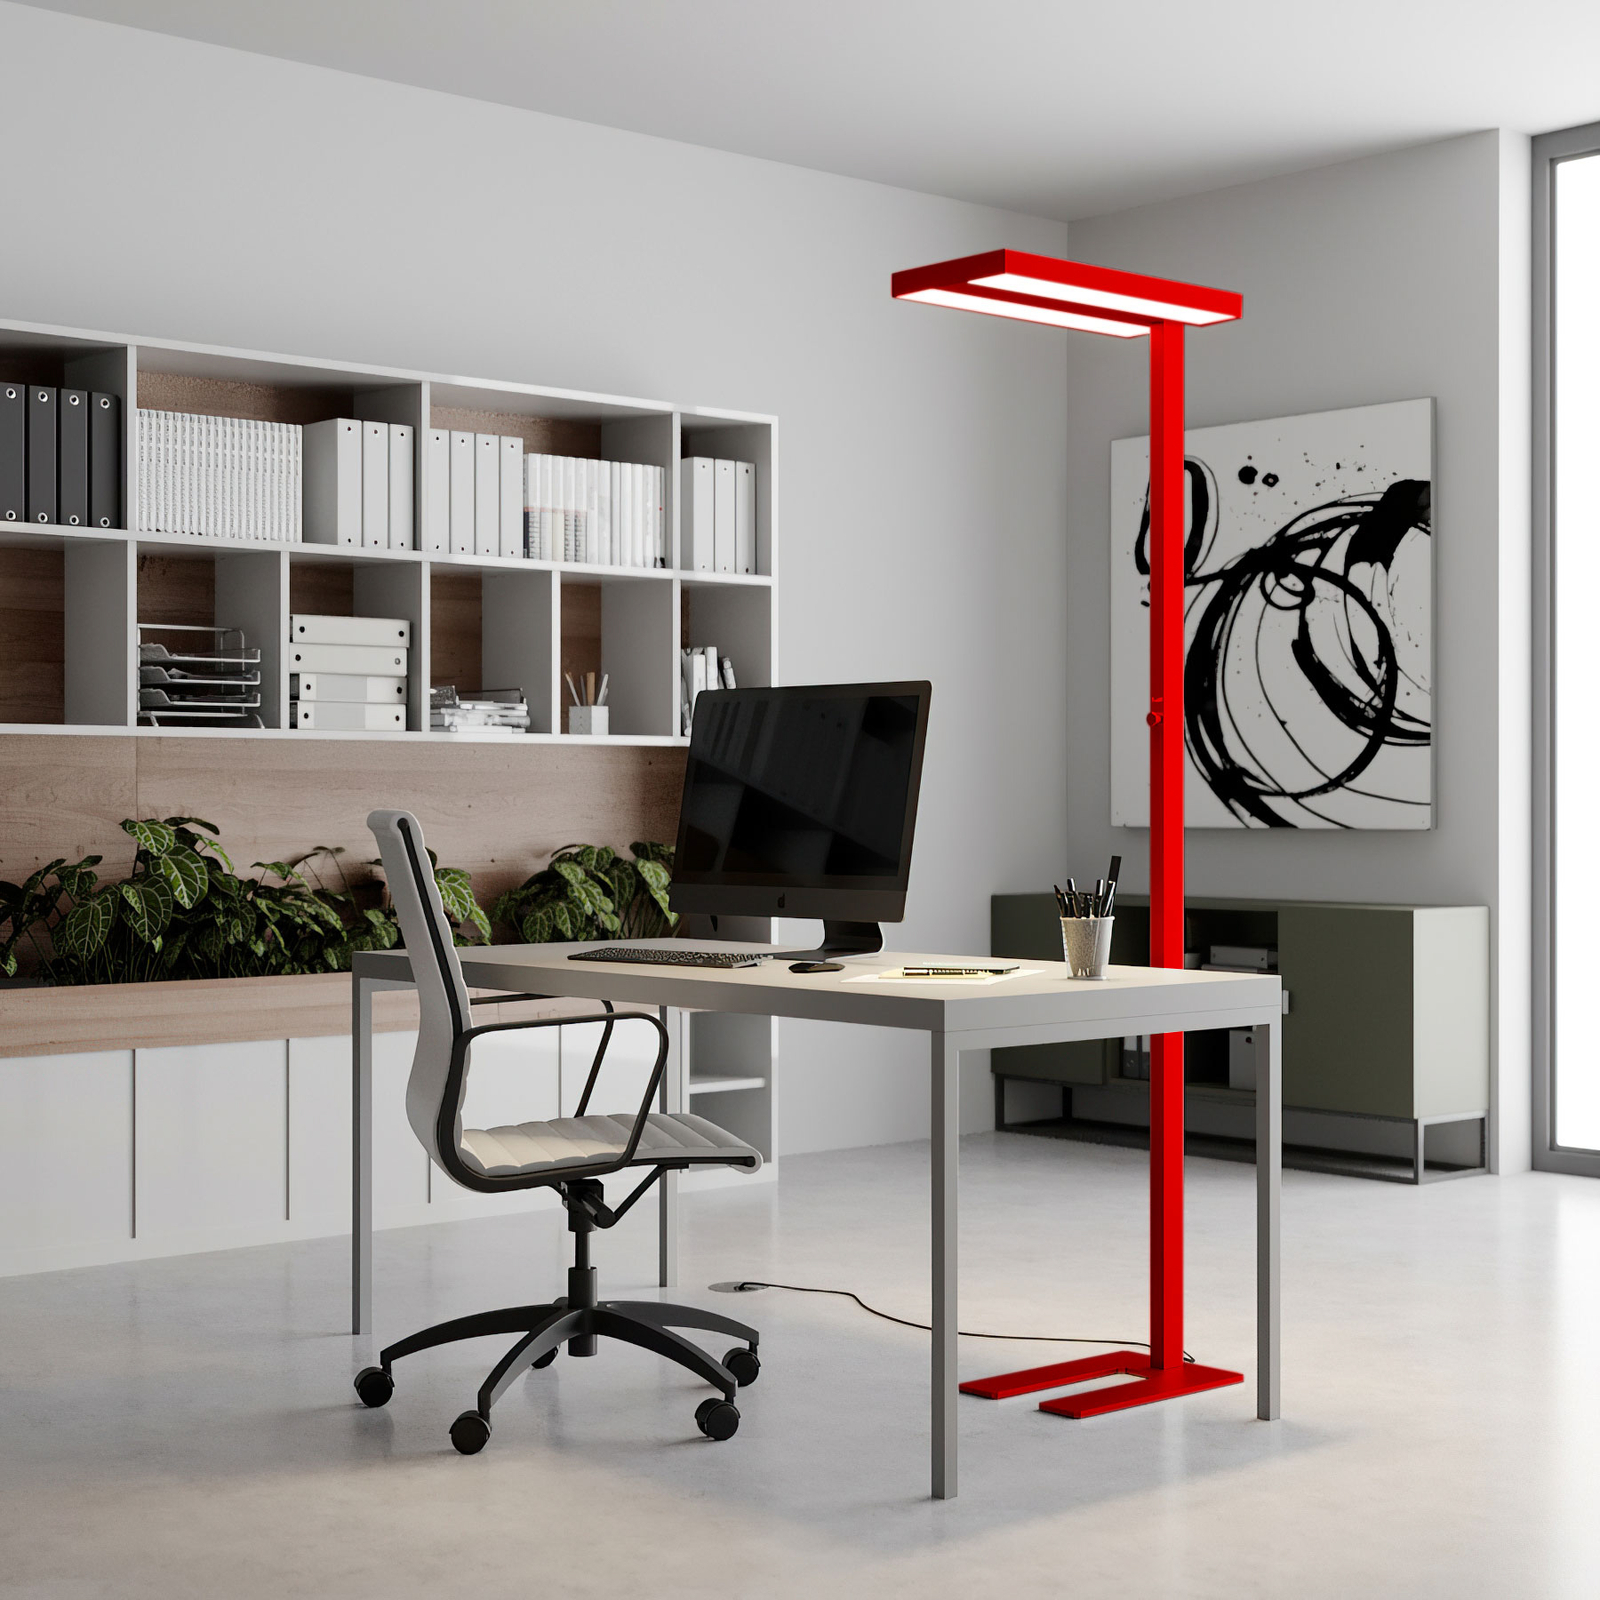 Arcchio LED floor lamp Logan Basic fluorescent red 6,000 lm dimmable